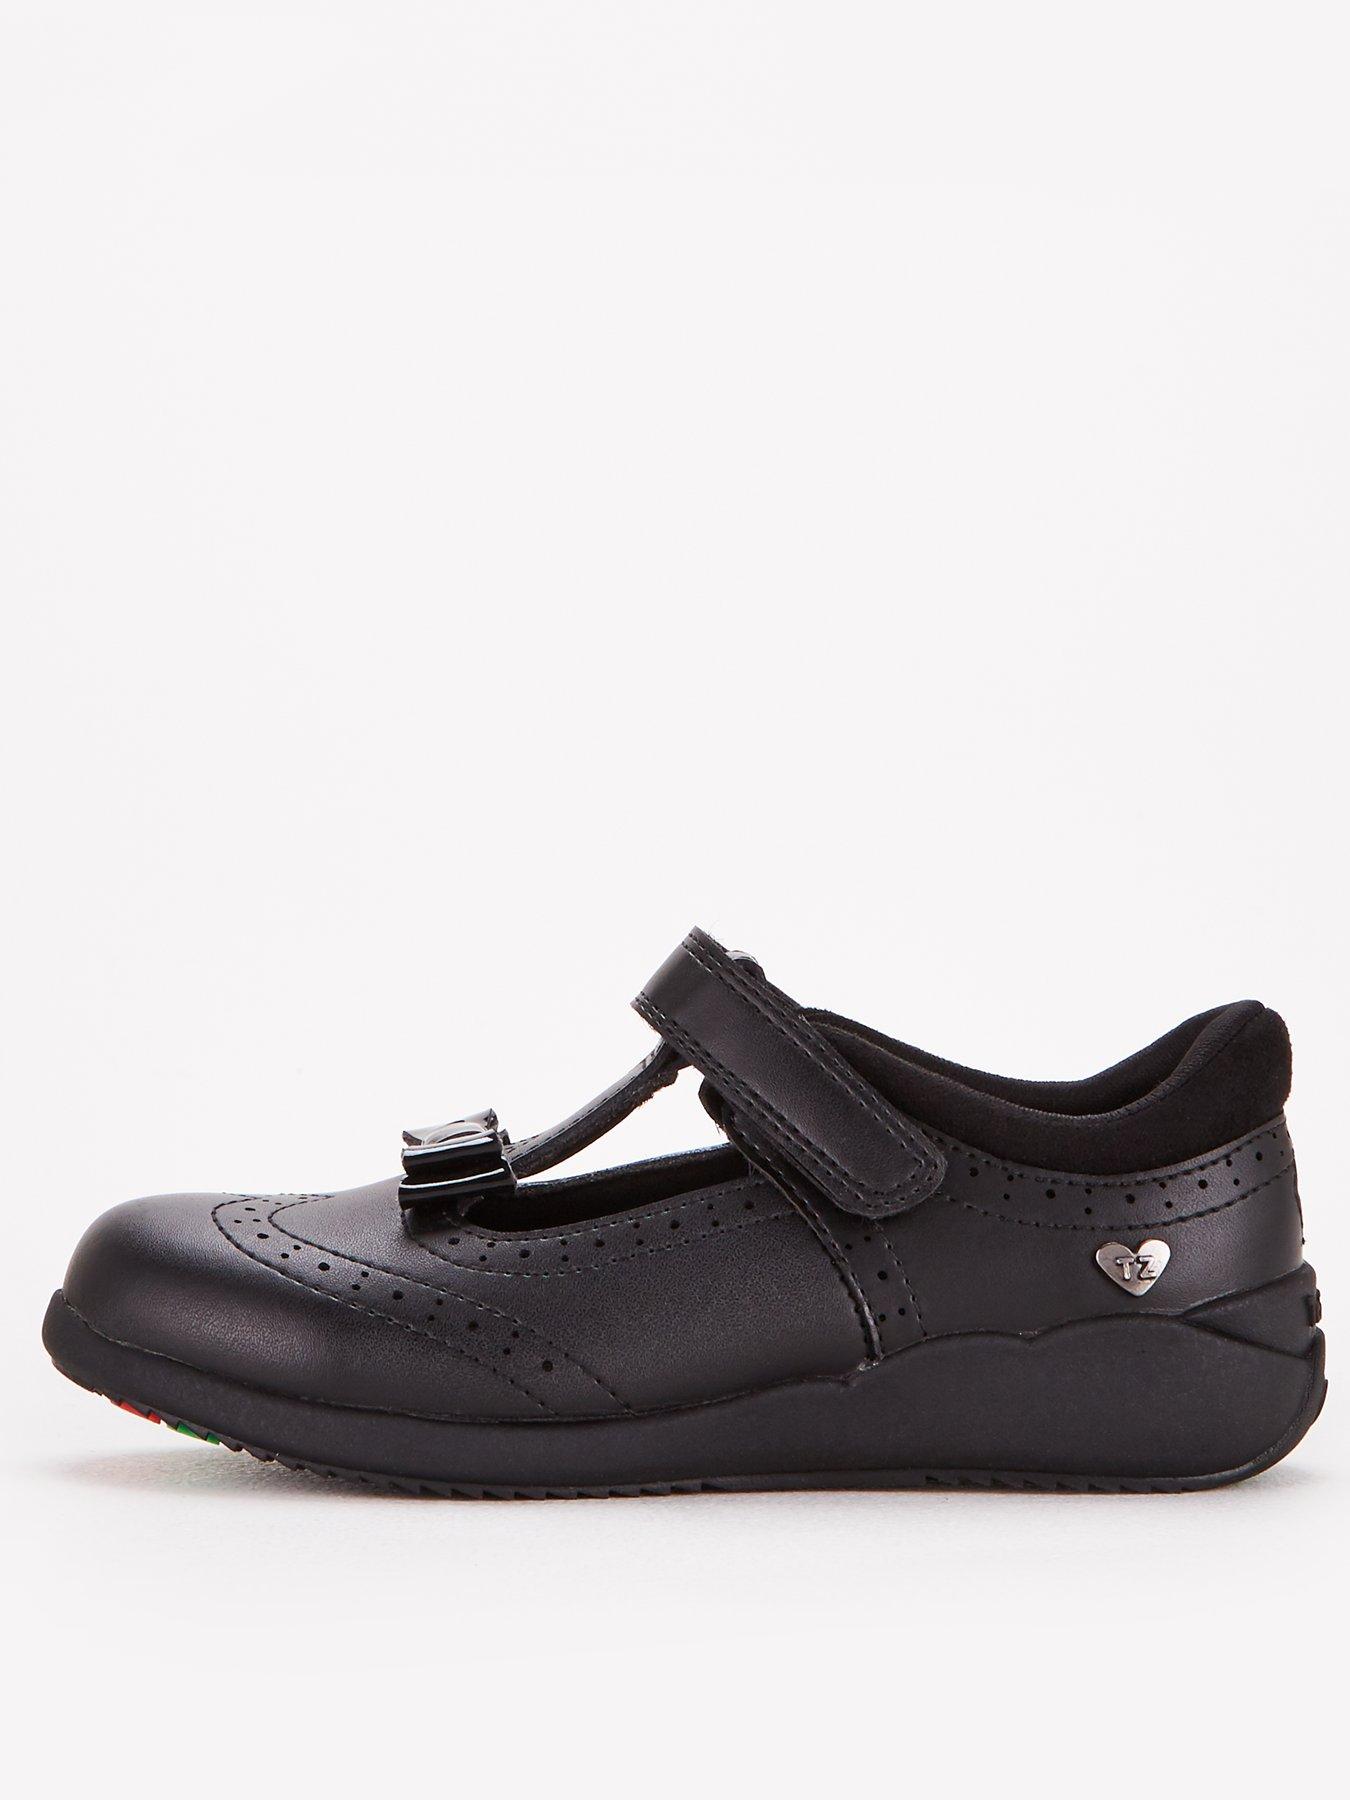  ToeZone at V by Very Girls Brogue Bow Leather School Shoe - Black